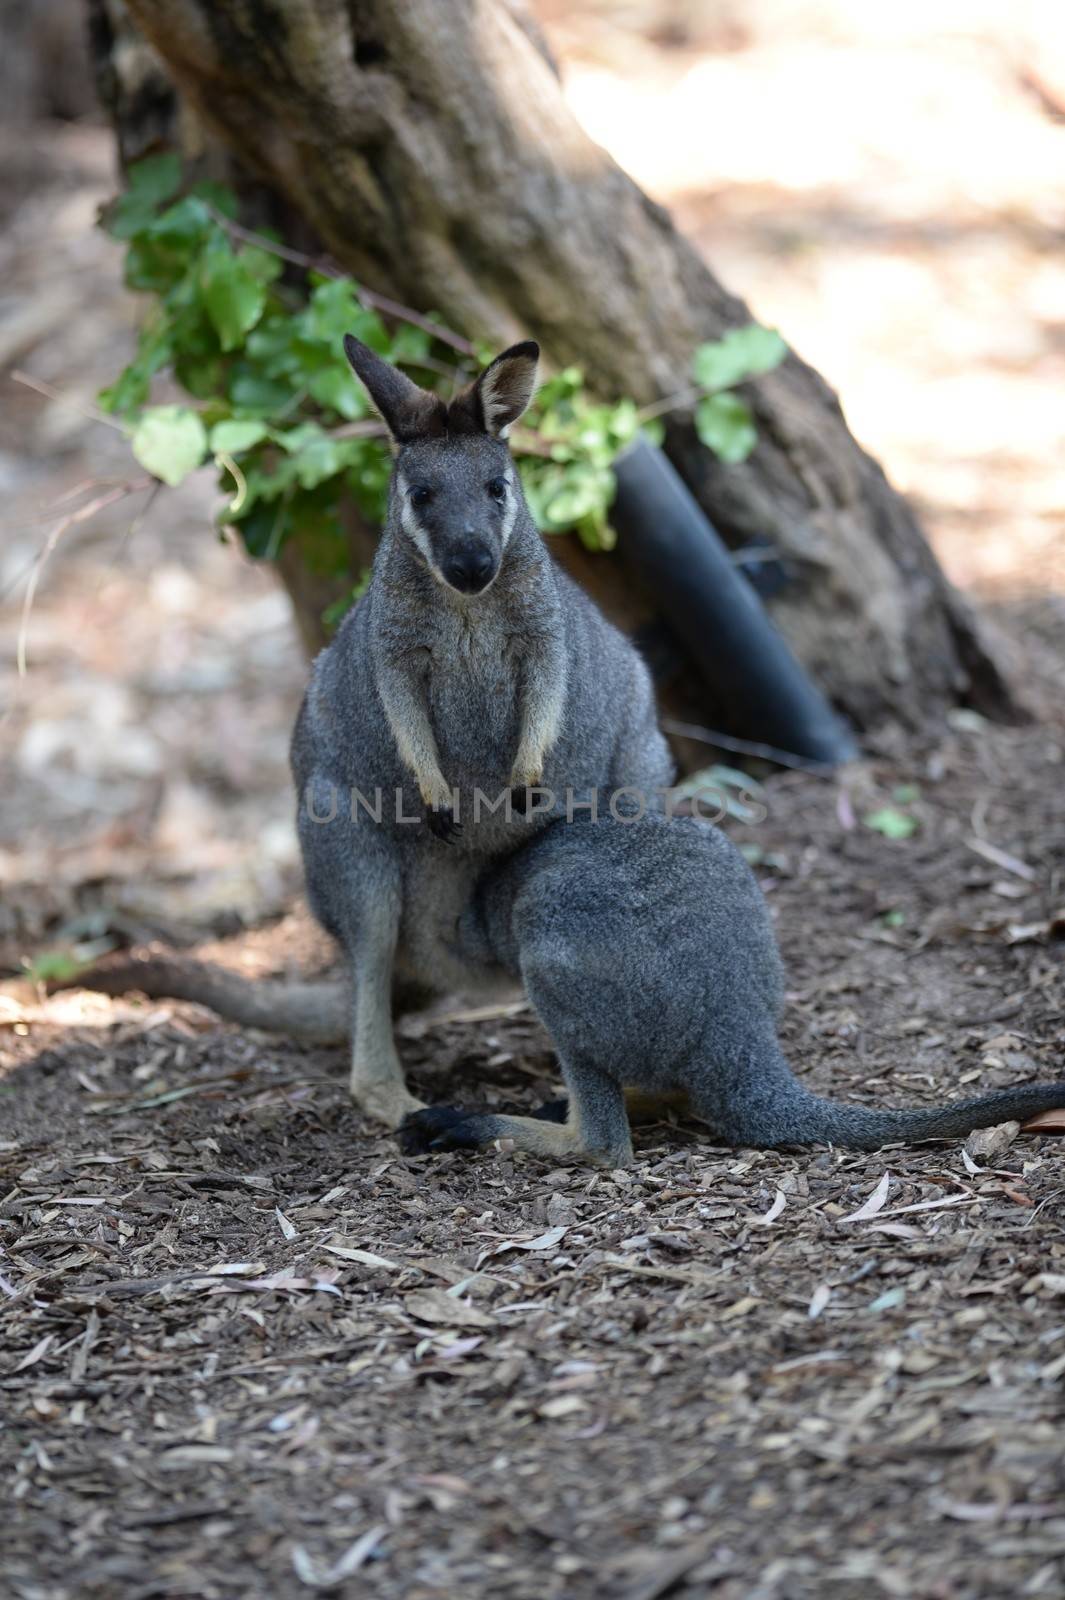 A shot of an Australian wallaby and her young